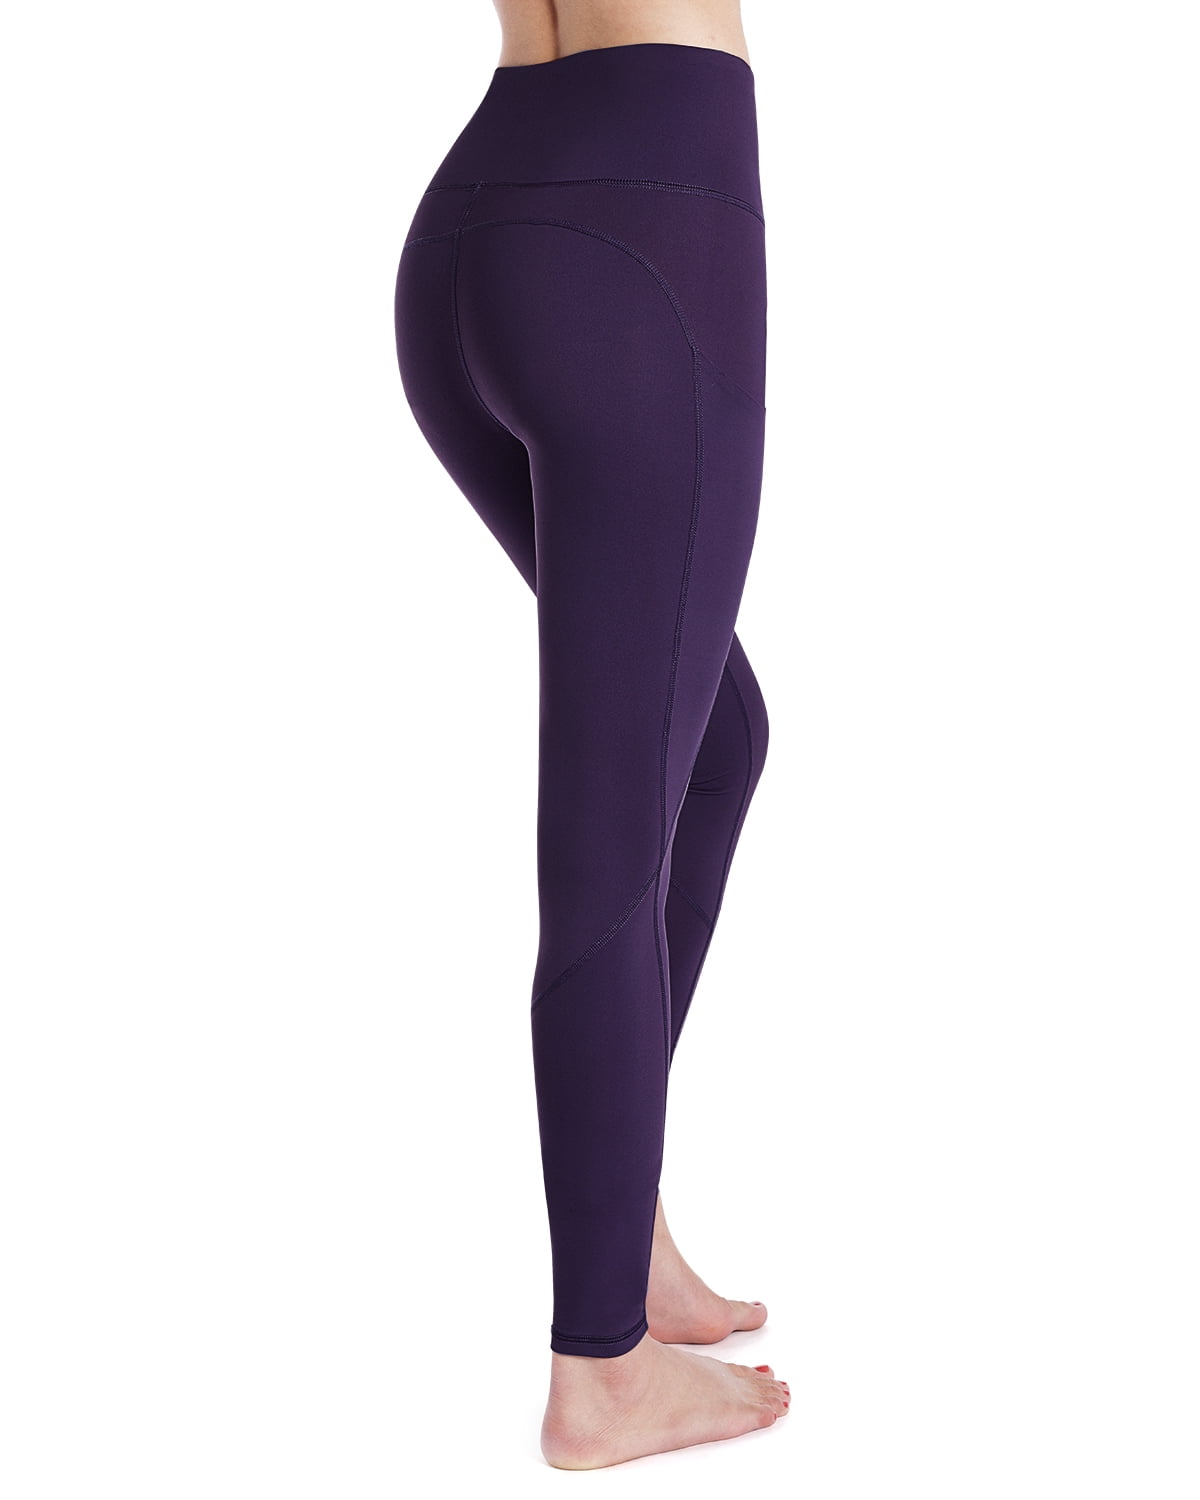 STYLEWORD Womens Yoga Pants with Pockets High Waist Workout